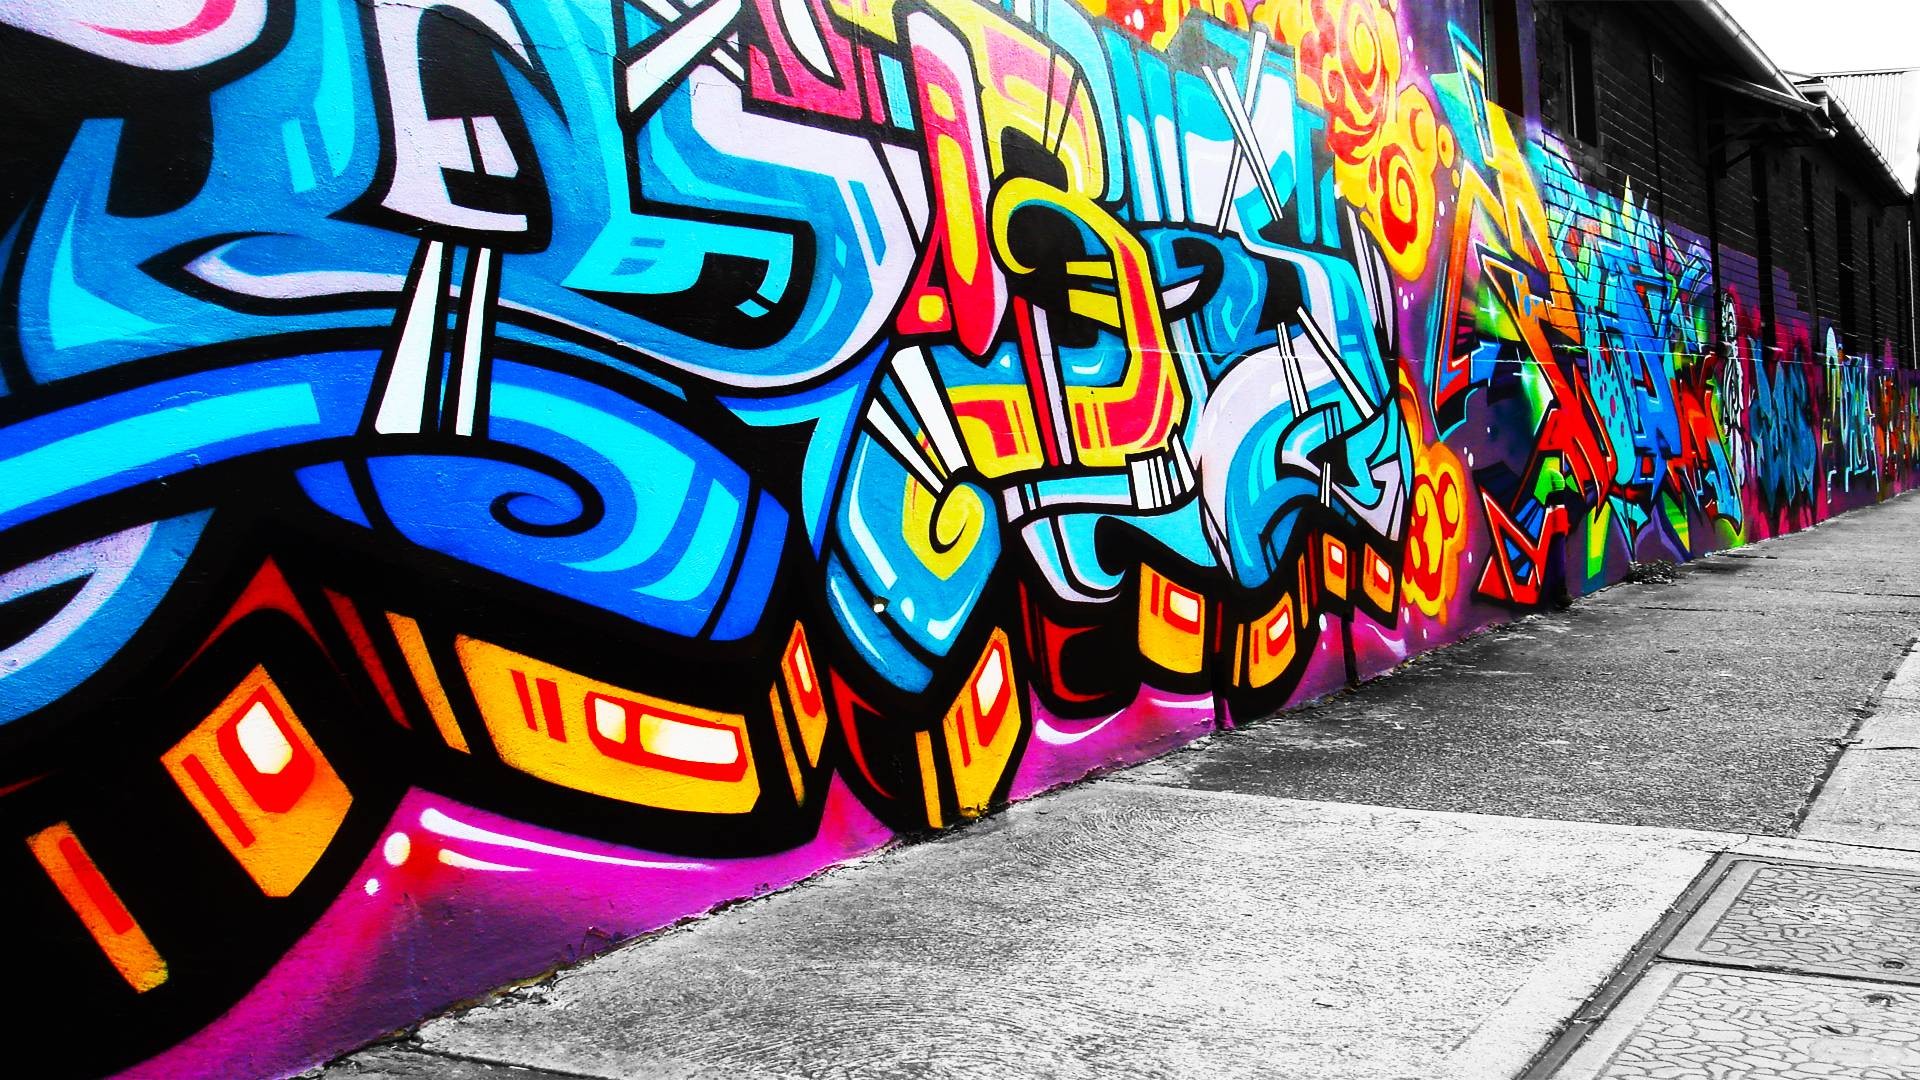 Graffiti Letters Wallpaper with image resolution 1920x1080 pixel. You can use this wallpaper as background for your desktop Computer Screensavers, Android or iPhone smartphones